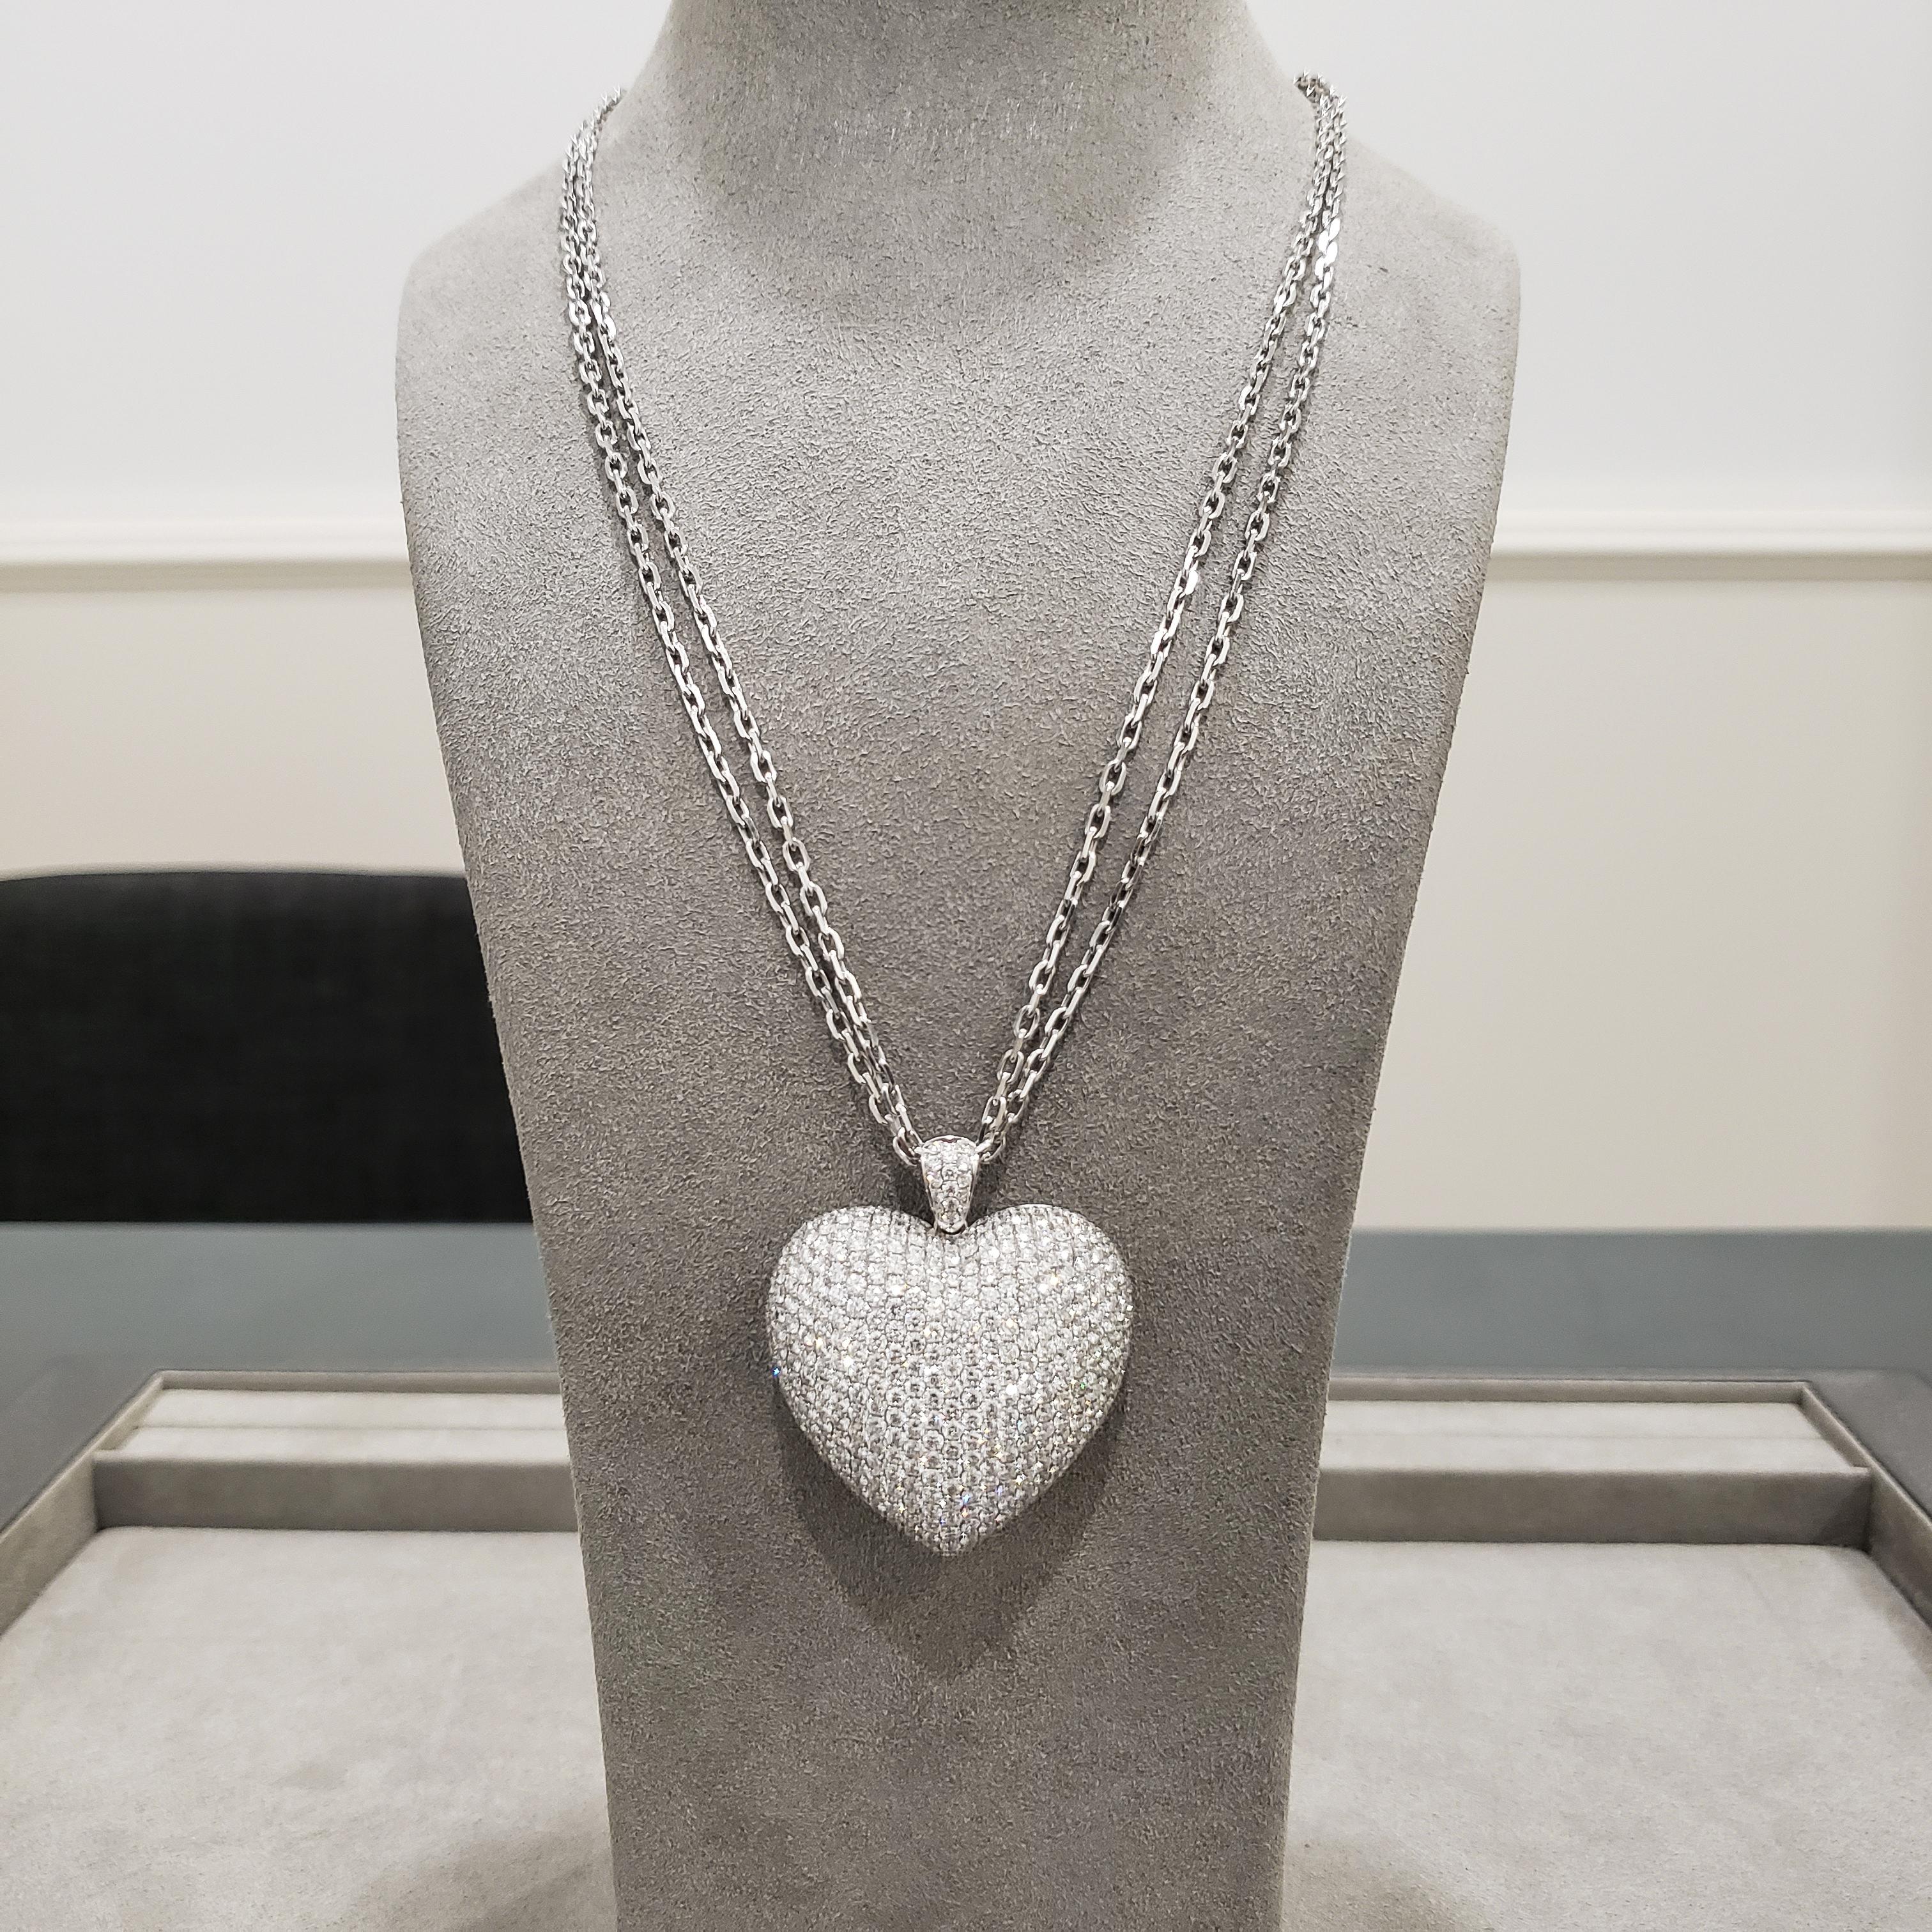 Showcasing an 18 karat white gold heart, encrusted with round brilliant diamonds weighing 12.10 carats total. Attach to a diamond encrusted bale. Suspended on two 20 inch white gold chain. 

